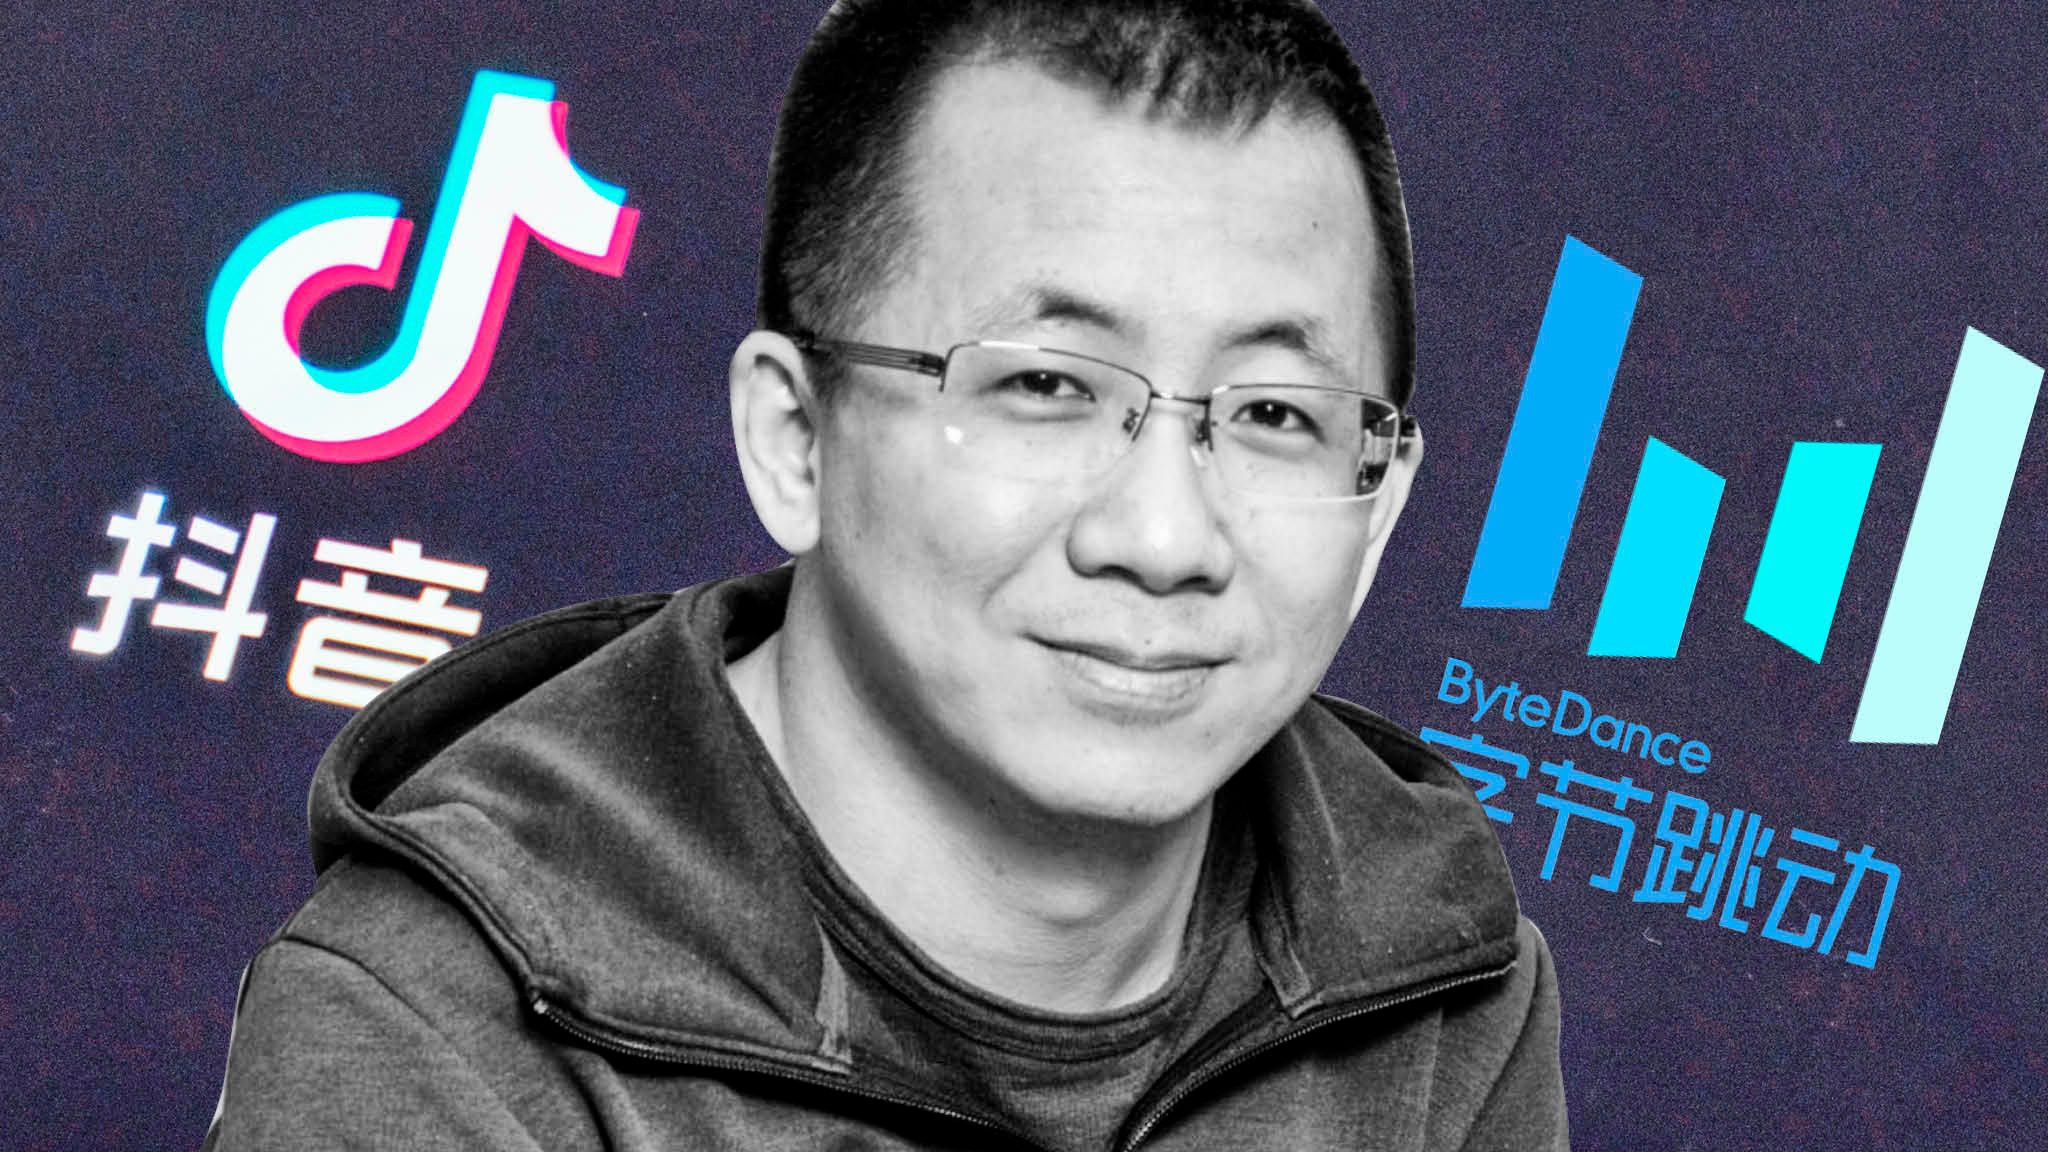 ByteDance to develop music streaming service “Fei Yue”